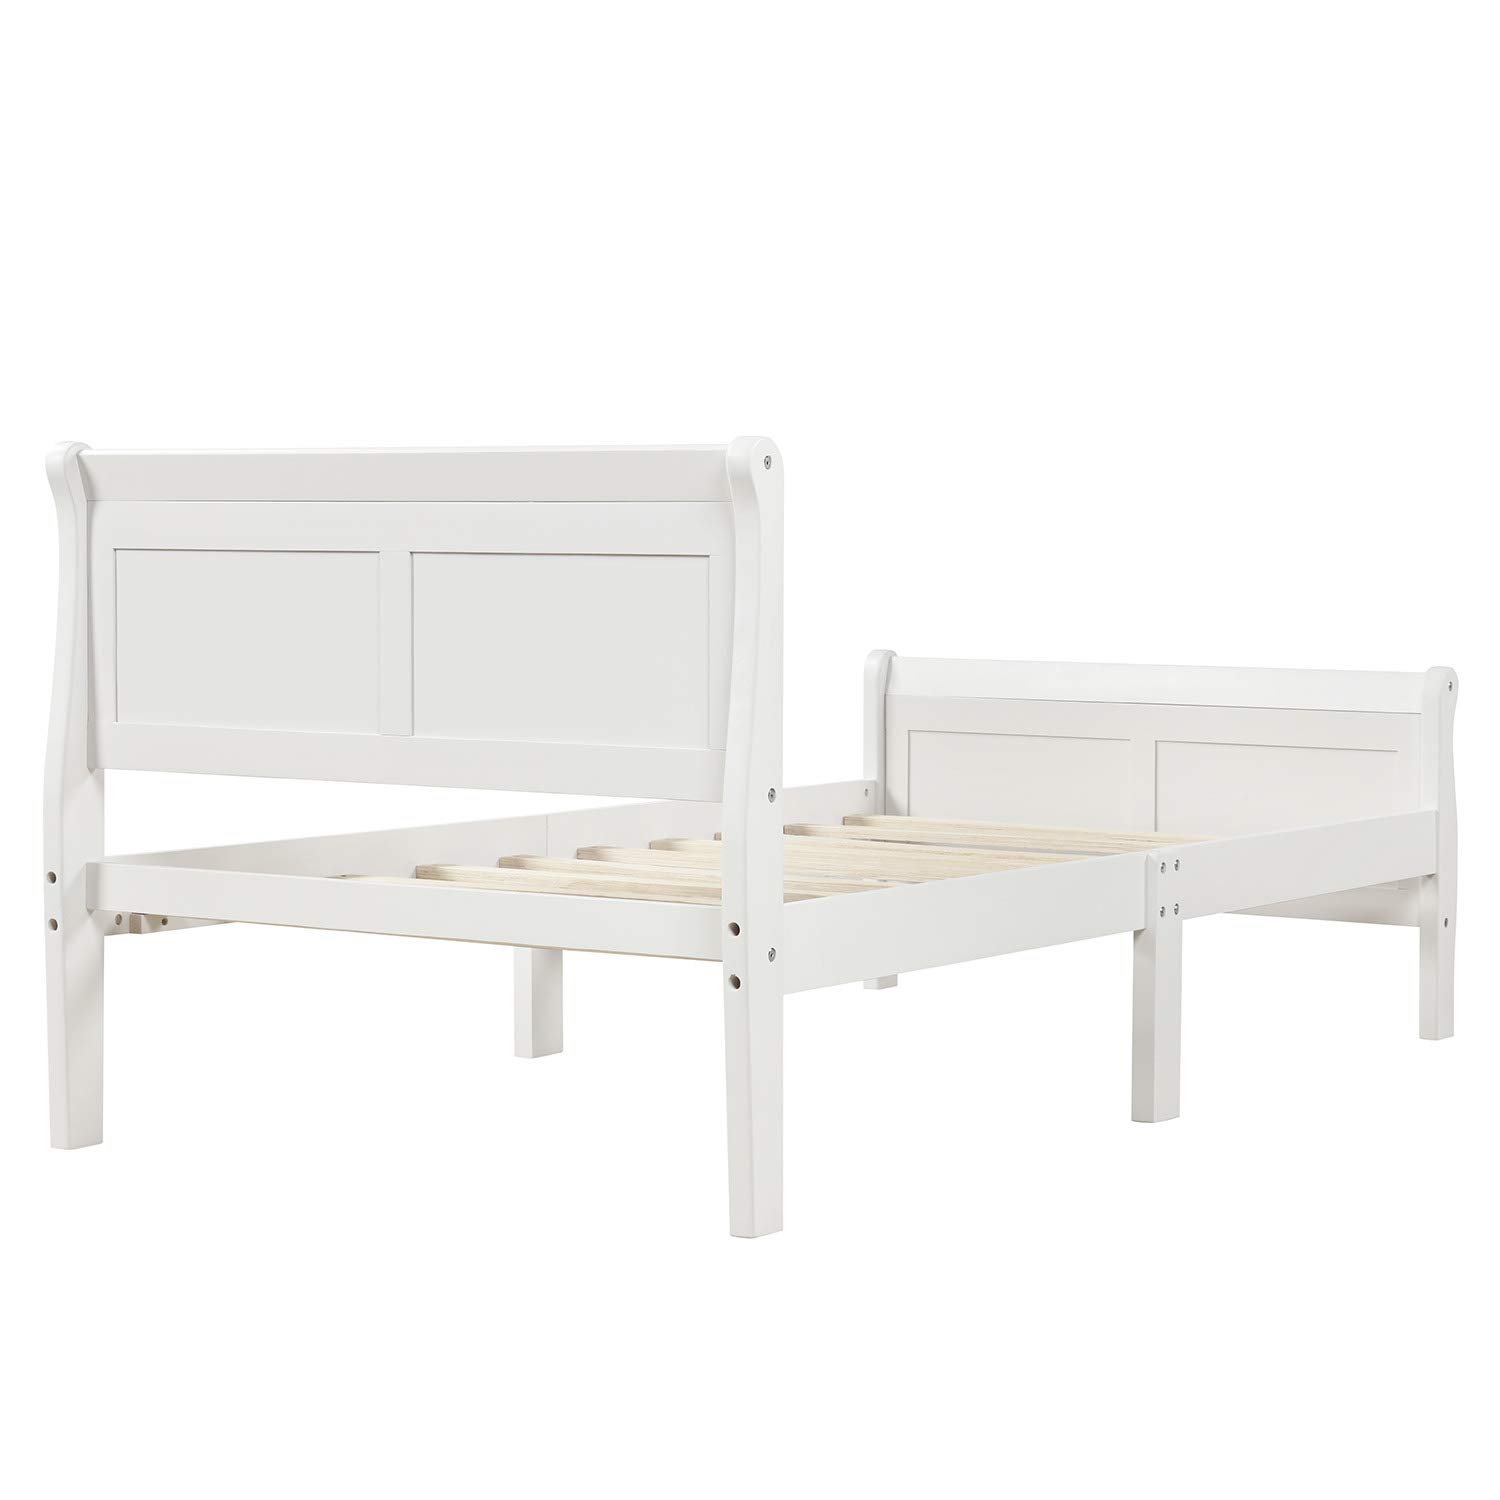 Harper & Bright Designs Twin Size Bed Frame with Headboard and Footboard, Wood Twin Platform Bed Frame with Wooden Slat Support, Sleigh Twin Bed for Kids,Boys, Girls,White